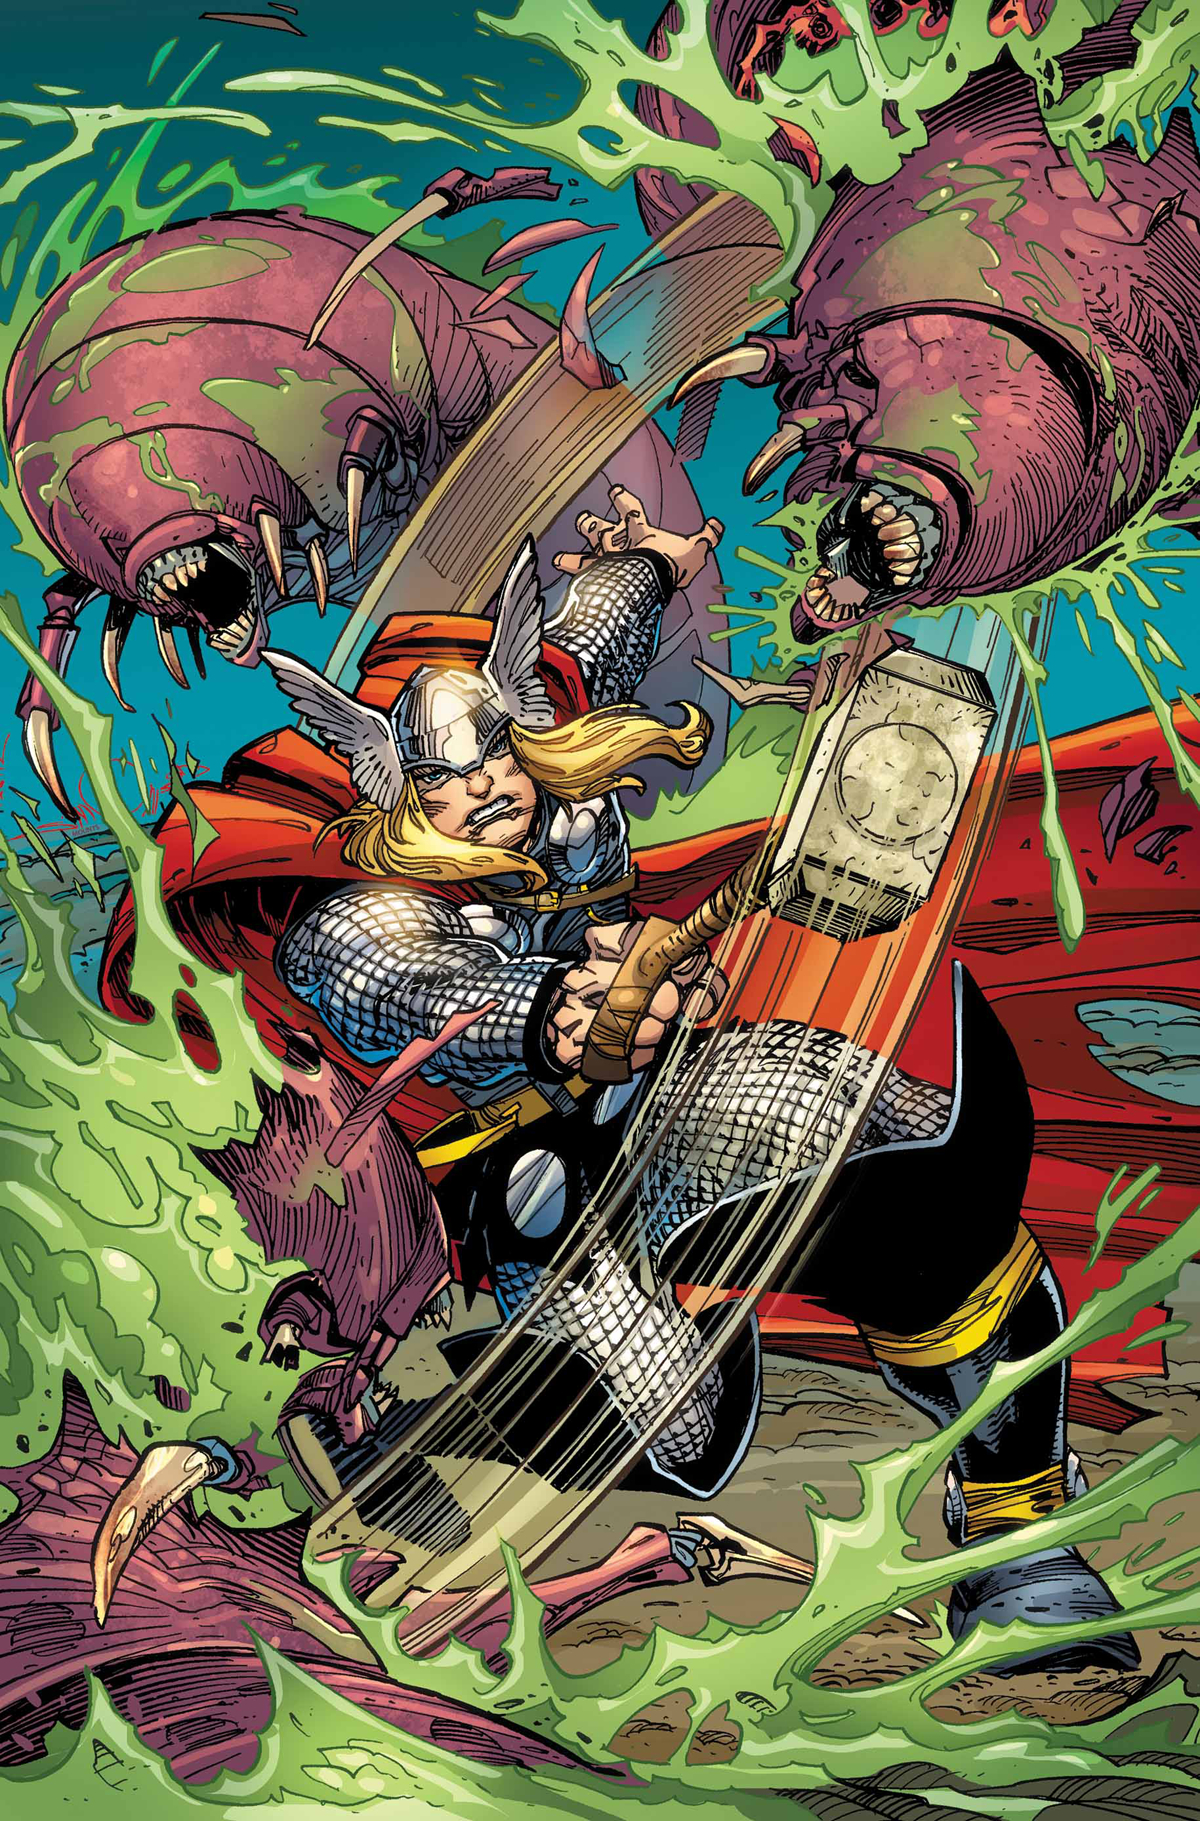 MIGHTY THOR #14